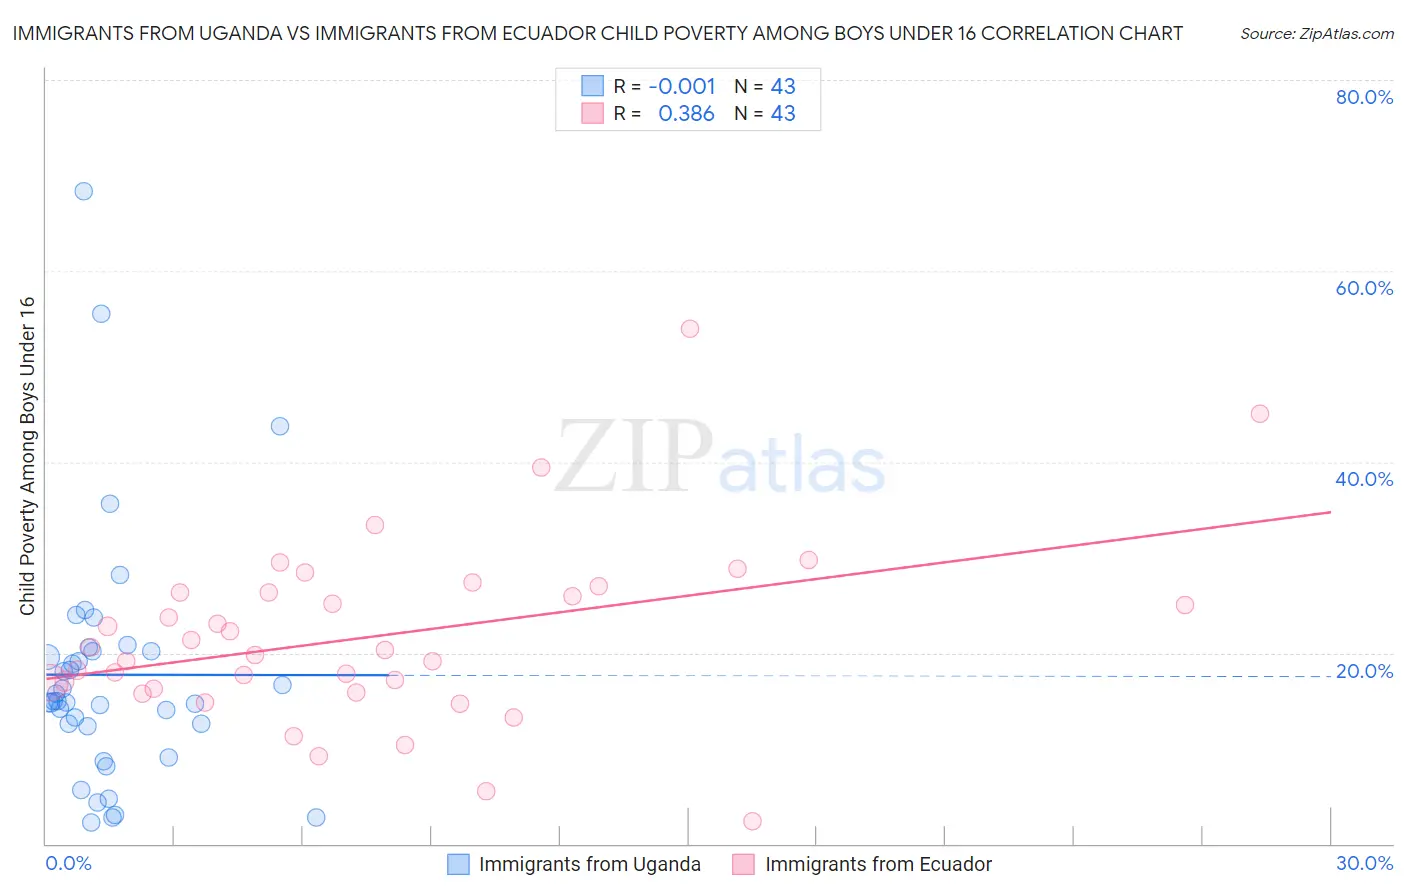 Immigrants from Uganda vs Immigrants from Ecuador Child Poverty Among Boys Under 16